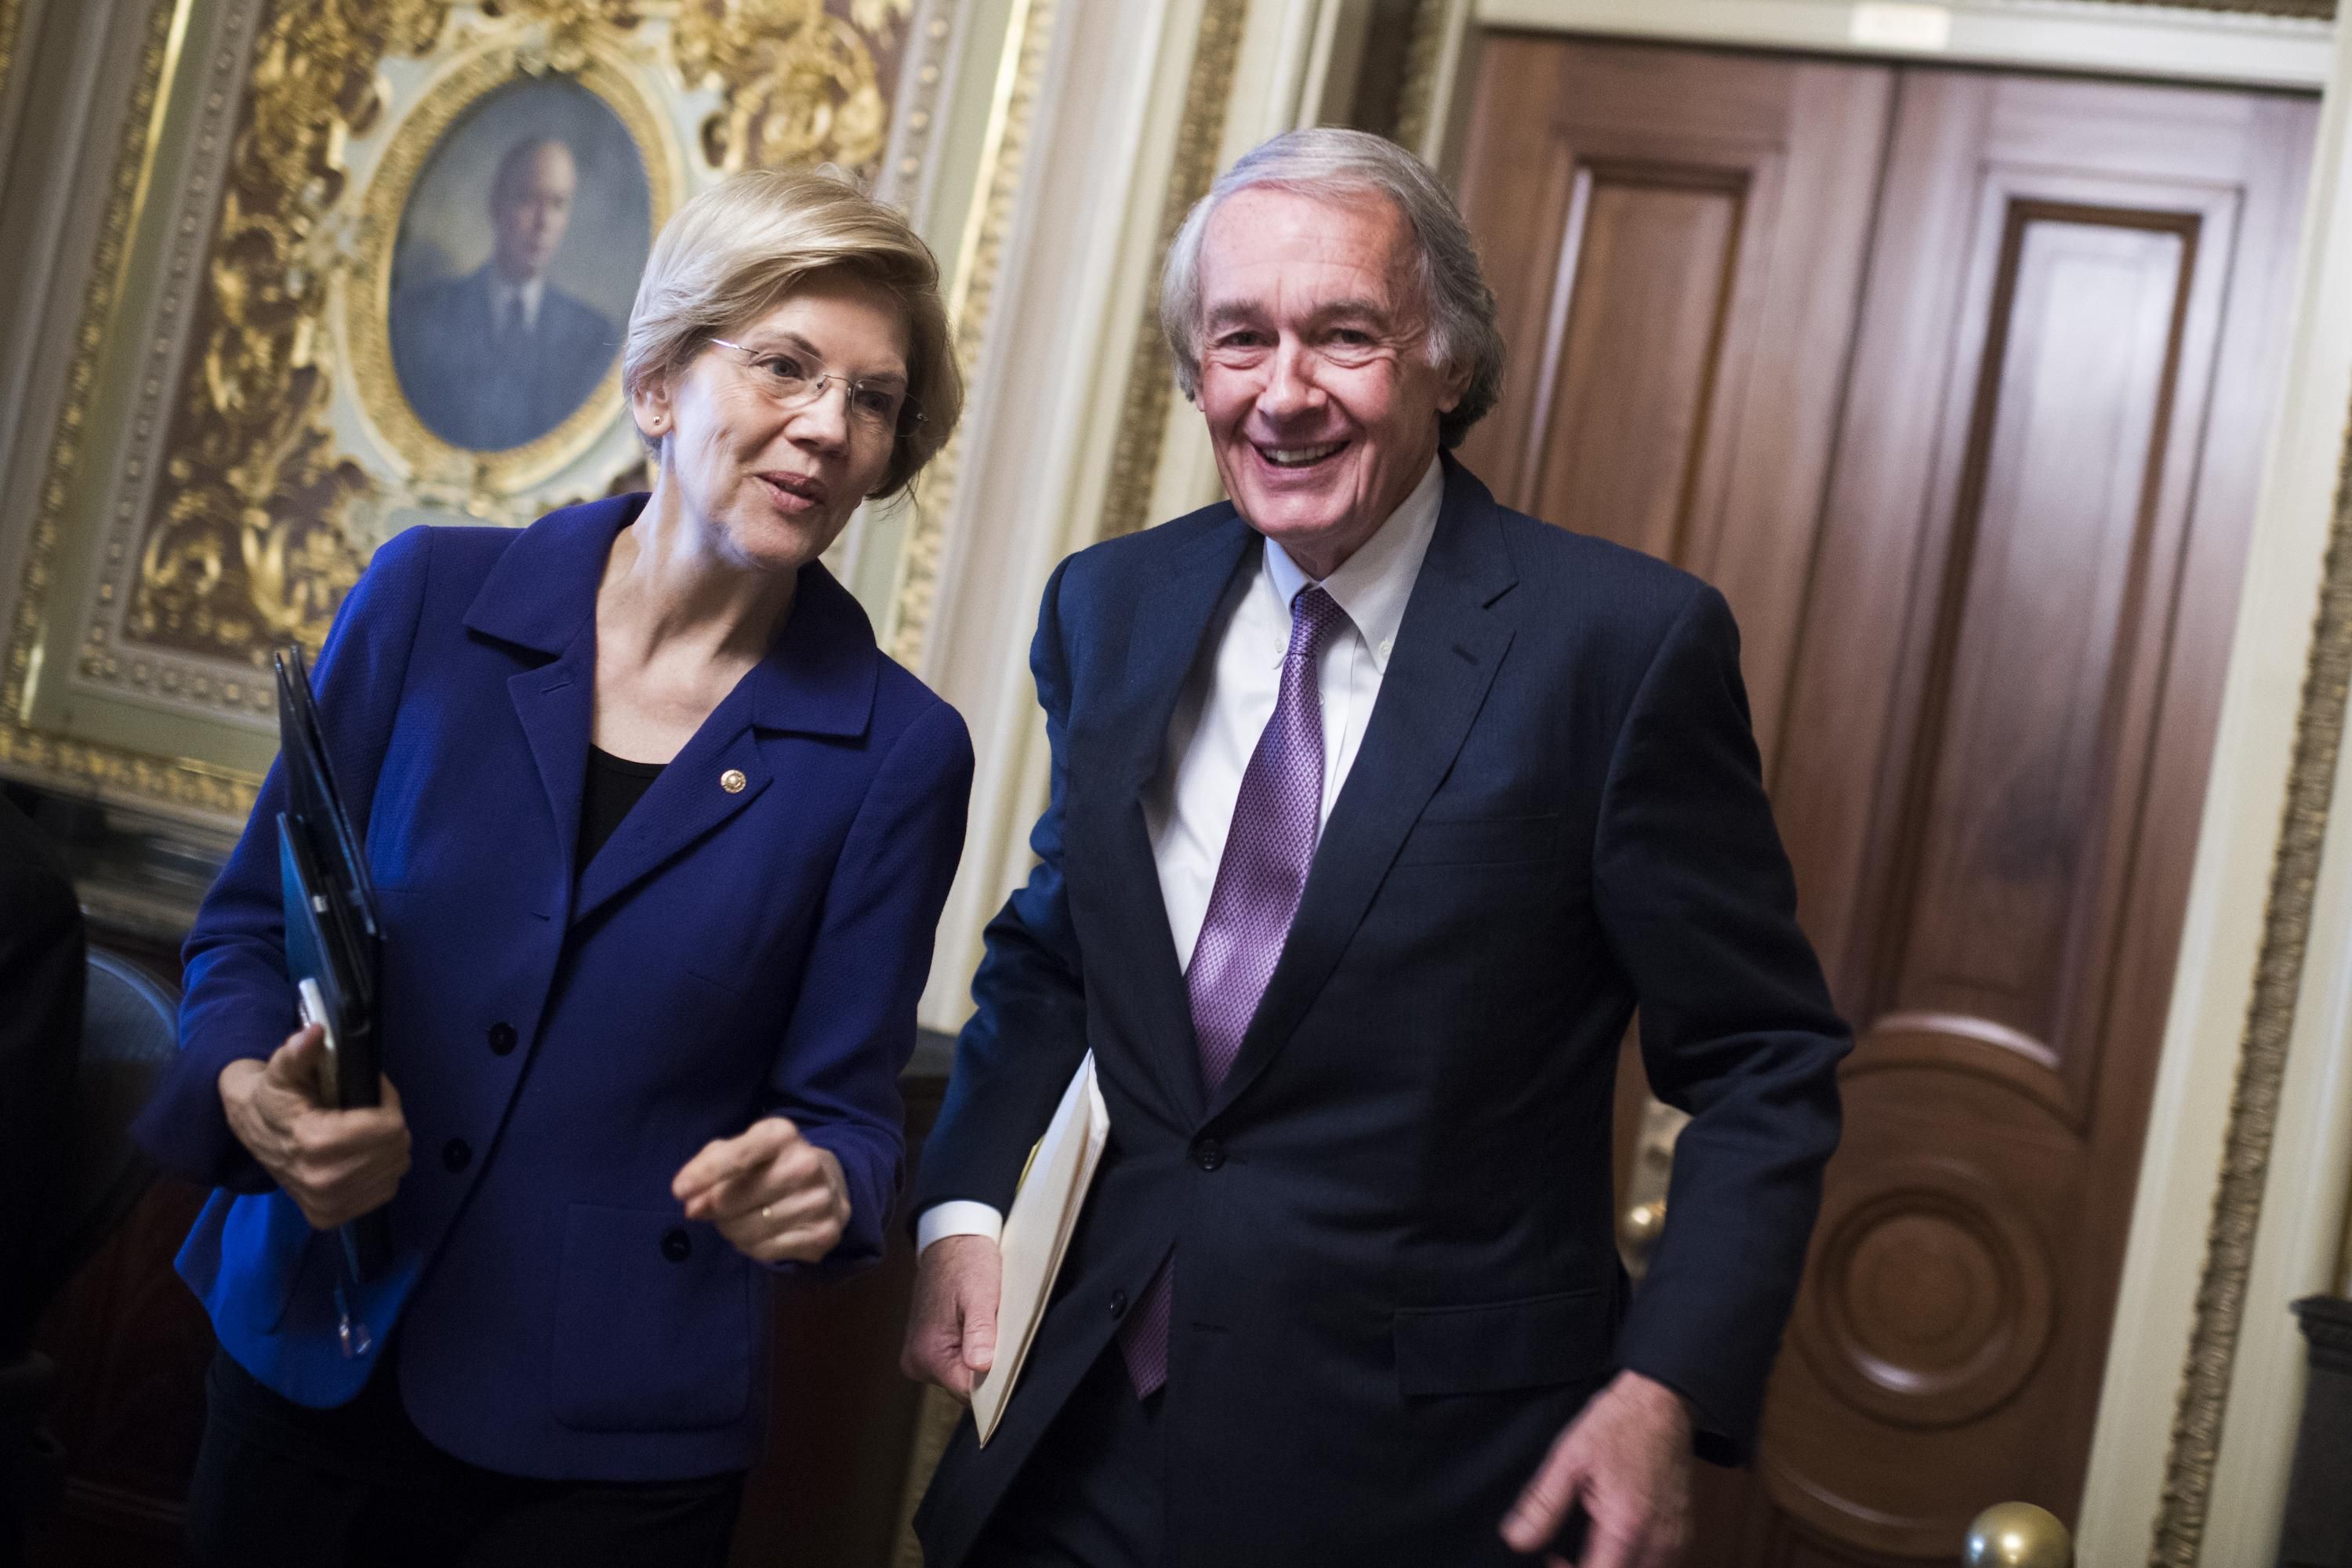 Sens. Ed Markey, D-Mass., and Elizabeth Warren, D-Mass., leave the Senate Policy luncheons in the Capitol on Tuesday, April 2, 2019